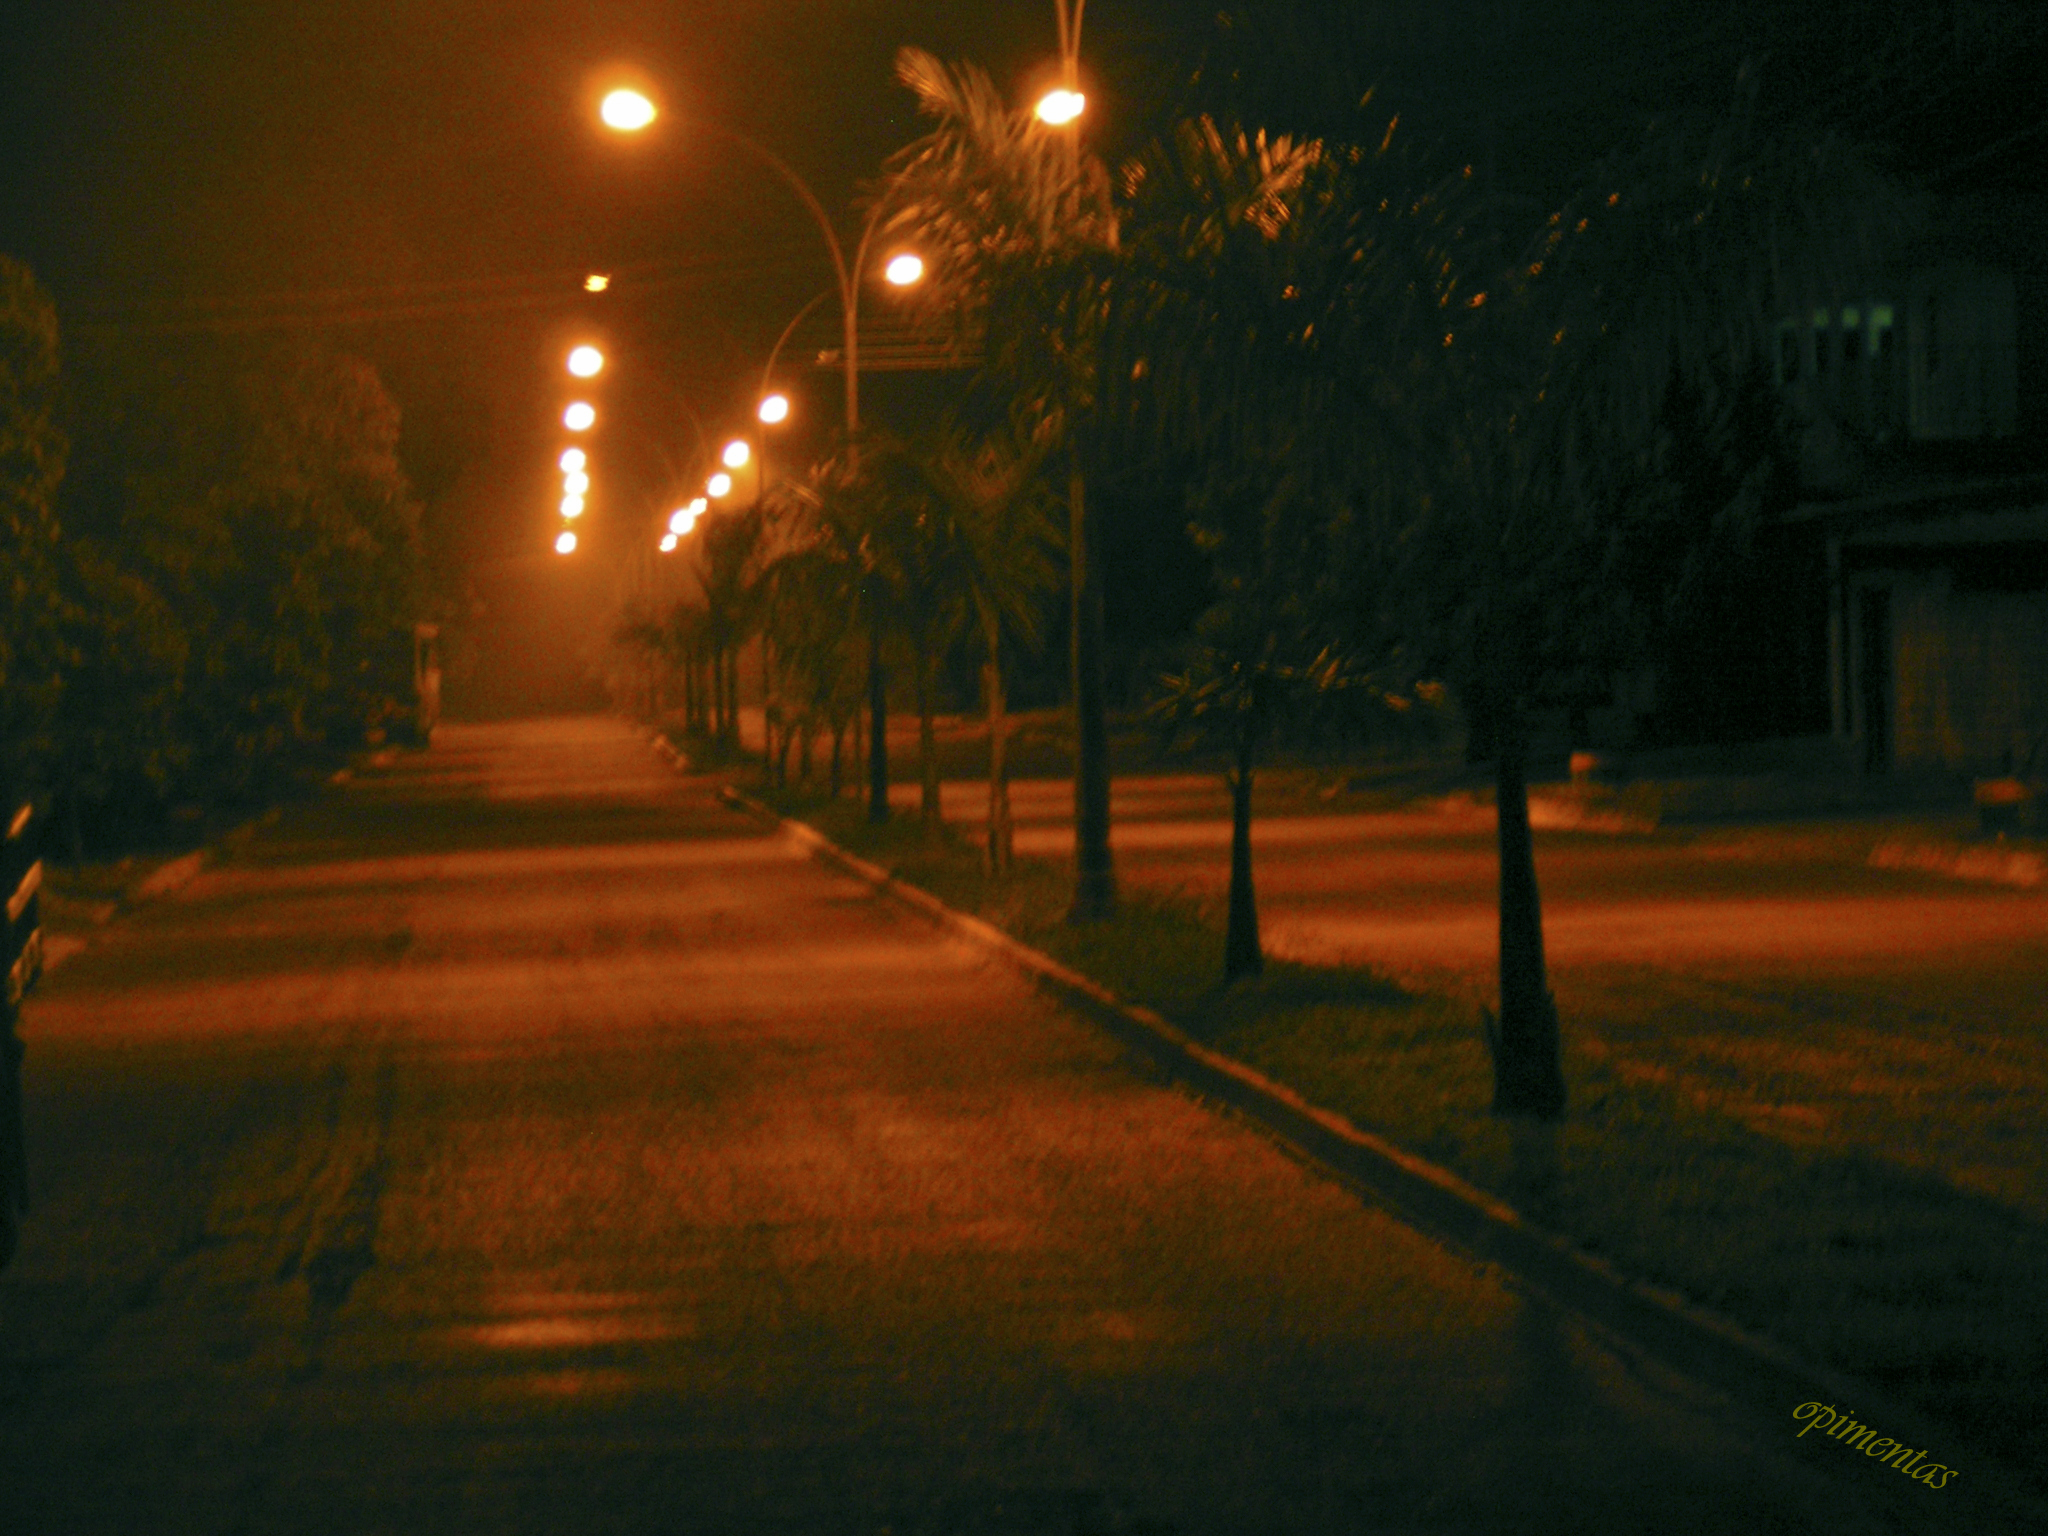 a street scene looking down a tree lined street at night